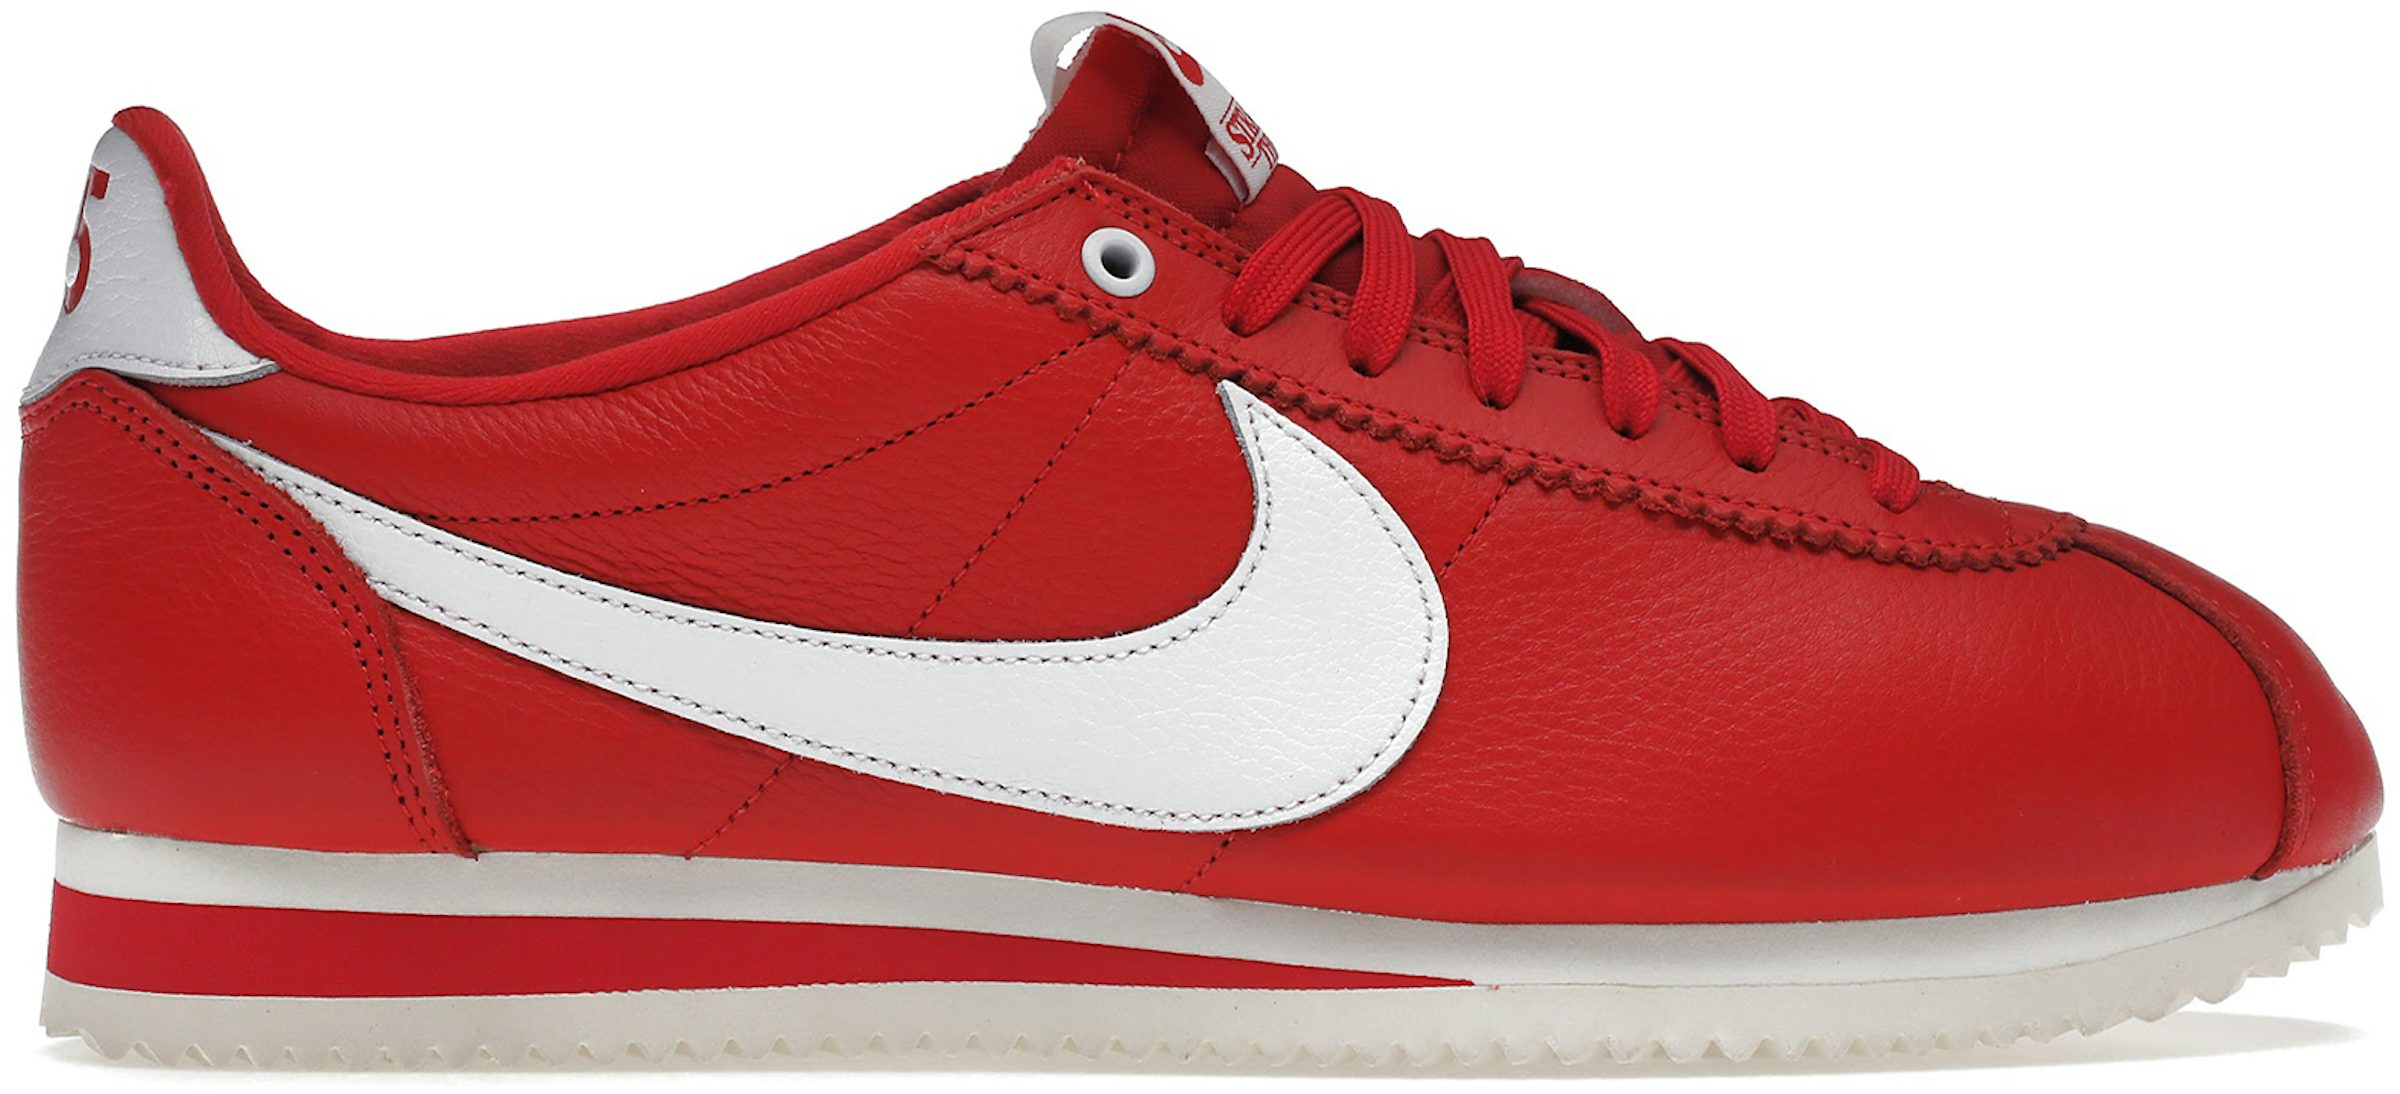 pit vliegtuigen roman Nike Classic Cortez Stranger Things Independence Day Pack Men's -  CK1907-600 - US